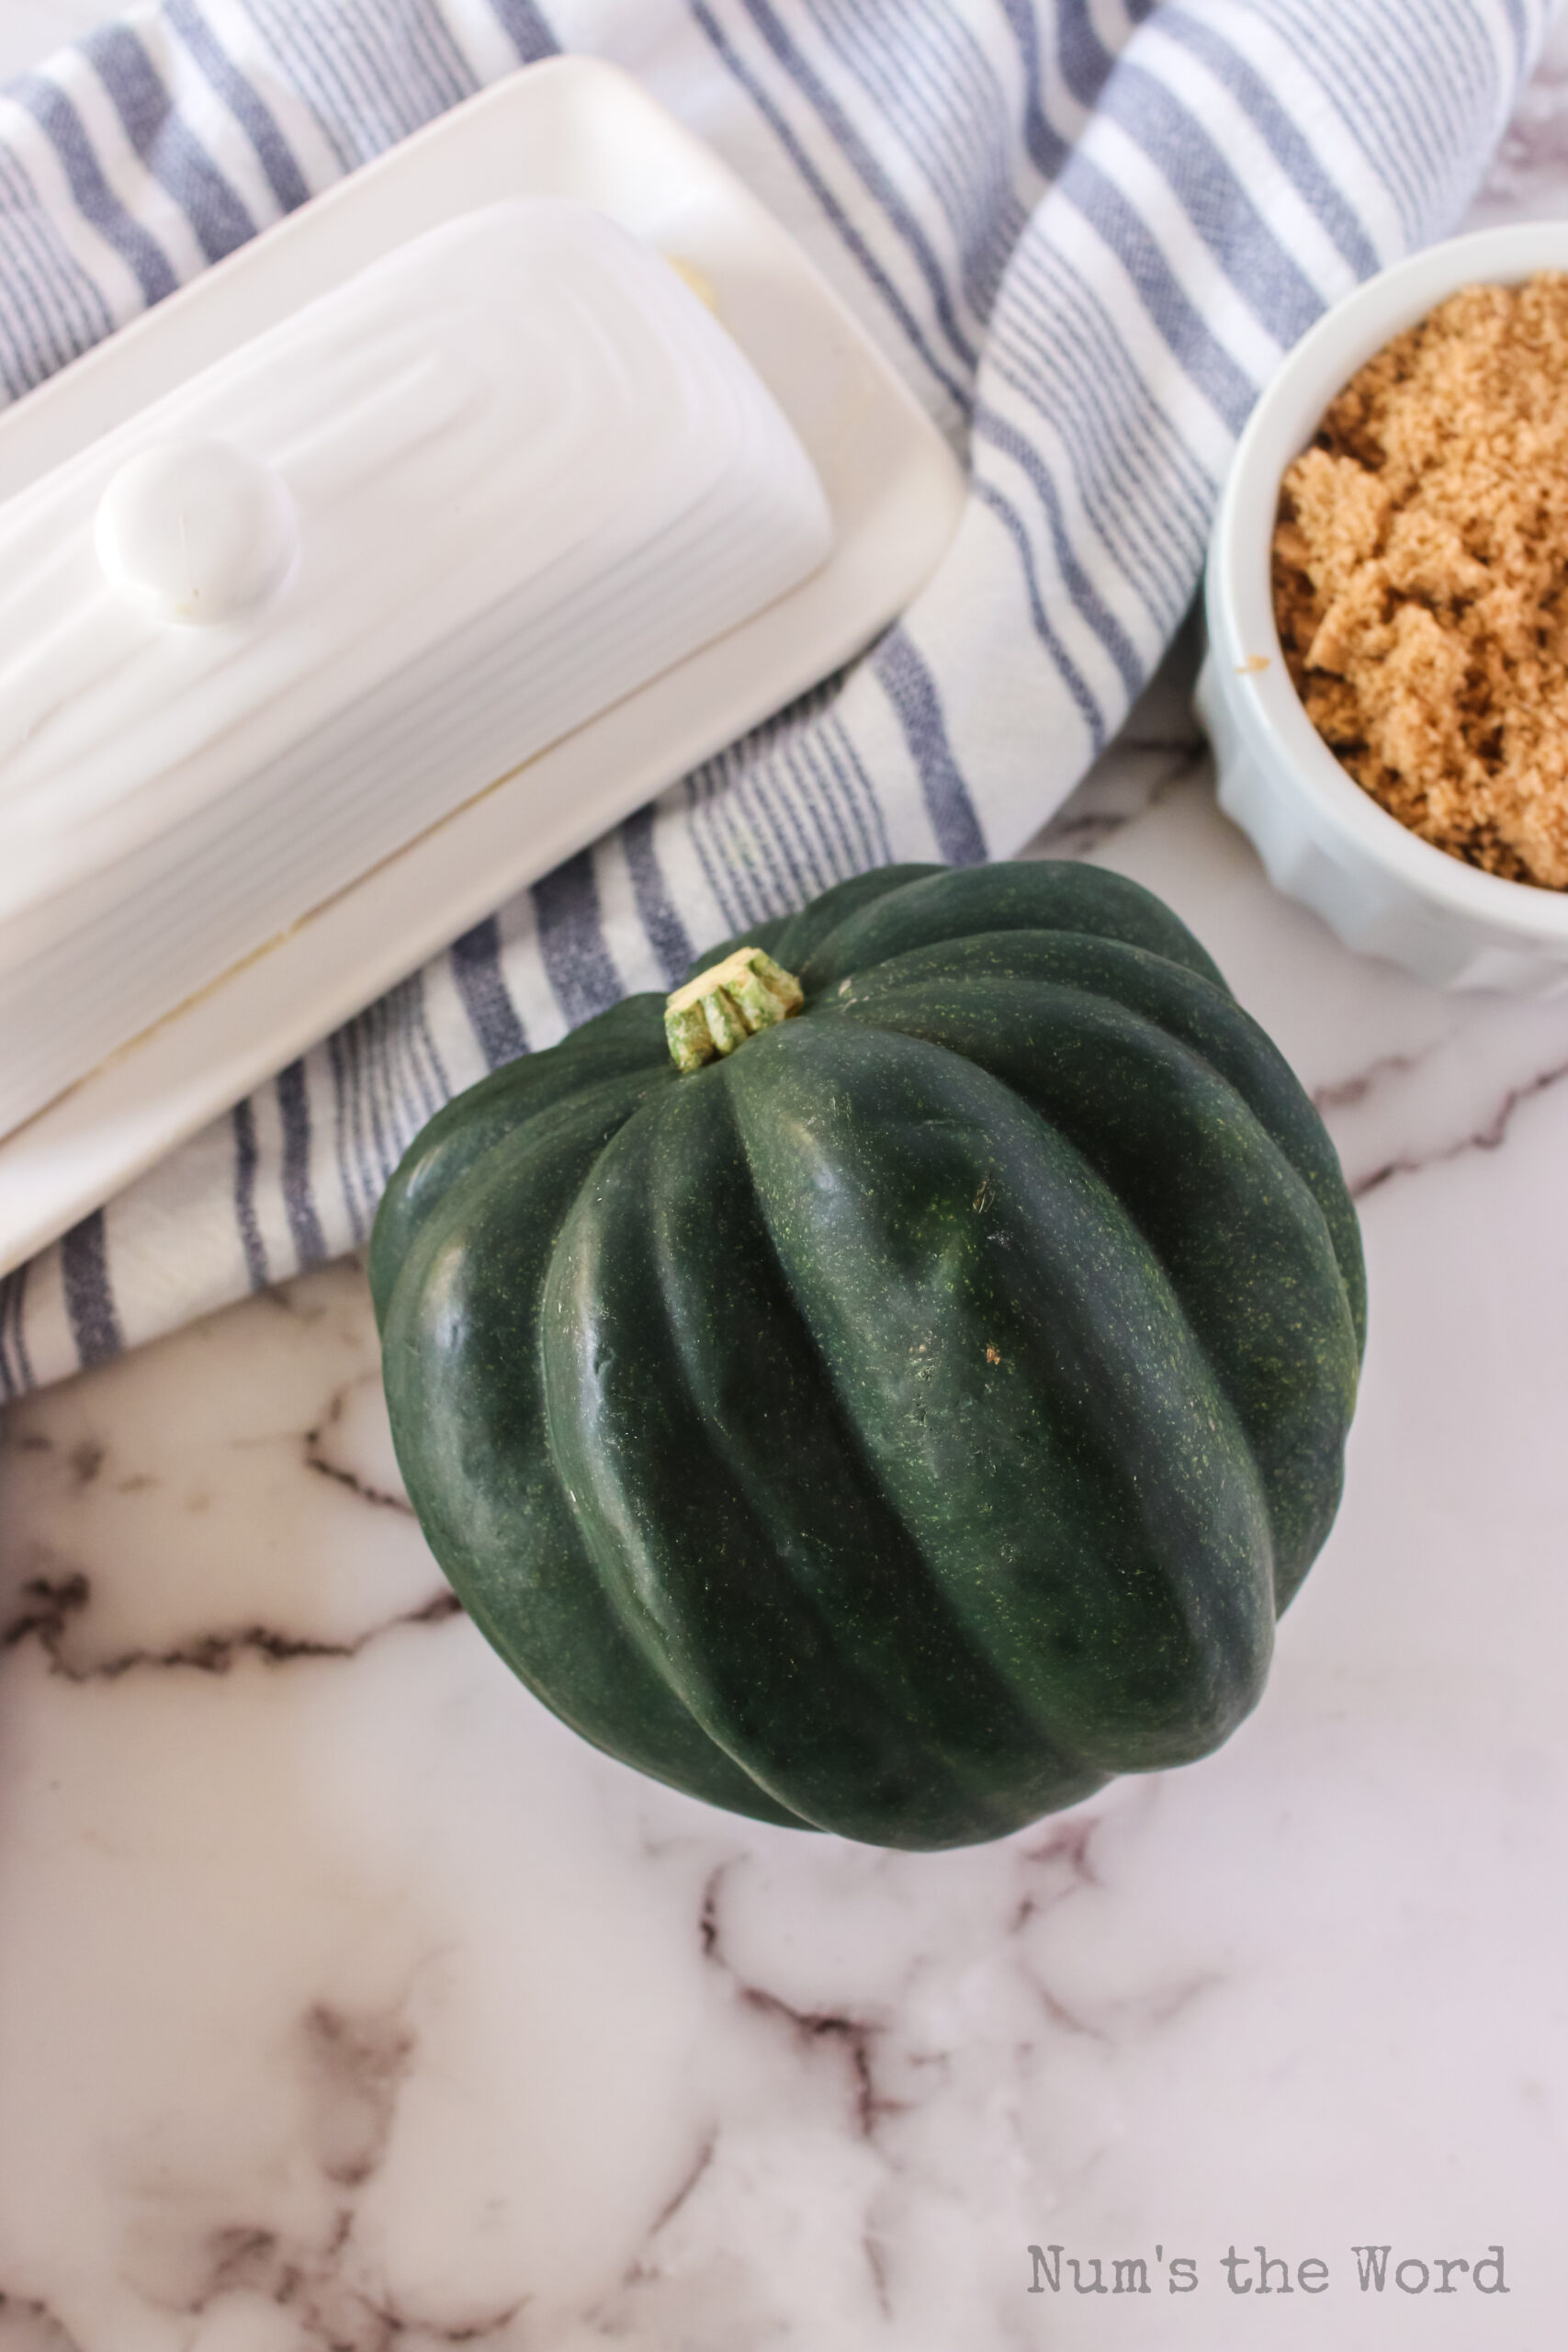 acorn squash next to a butter dish and bowl of brown sugar